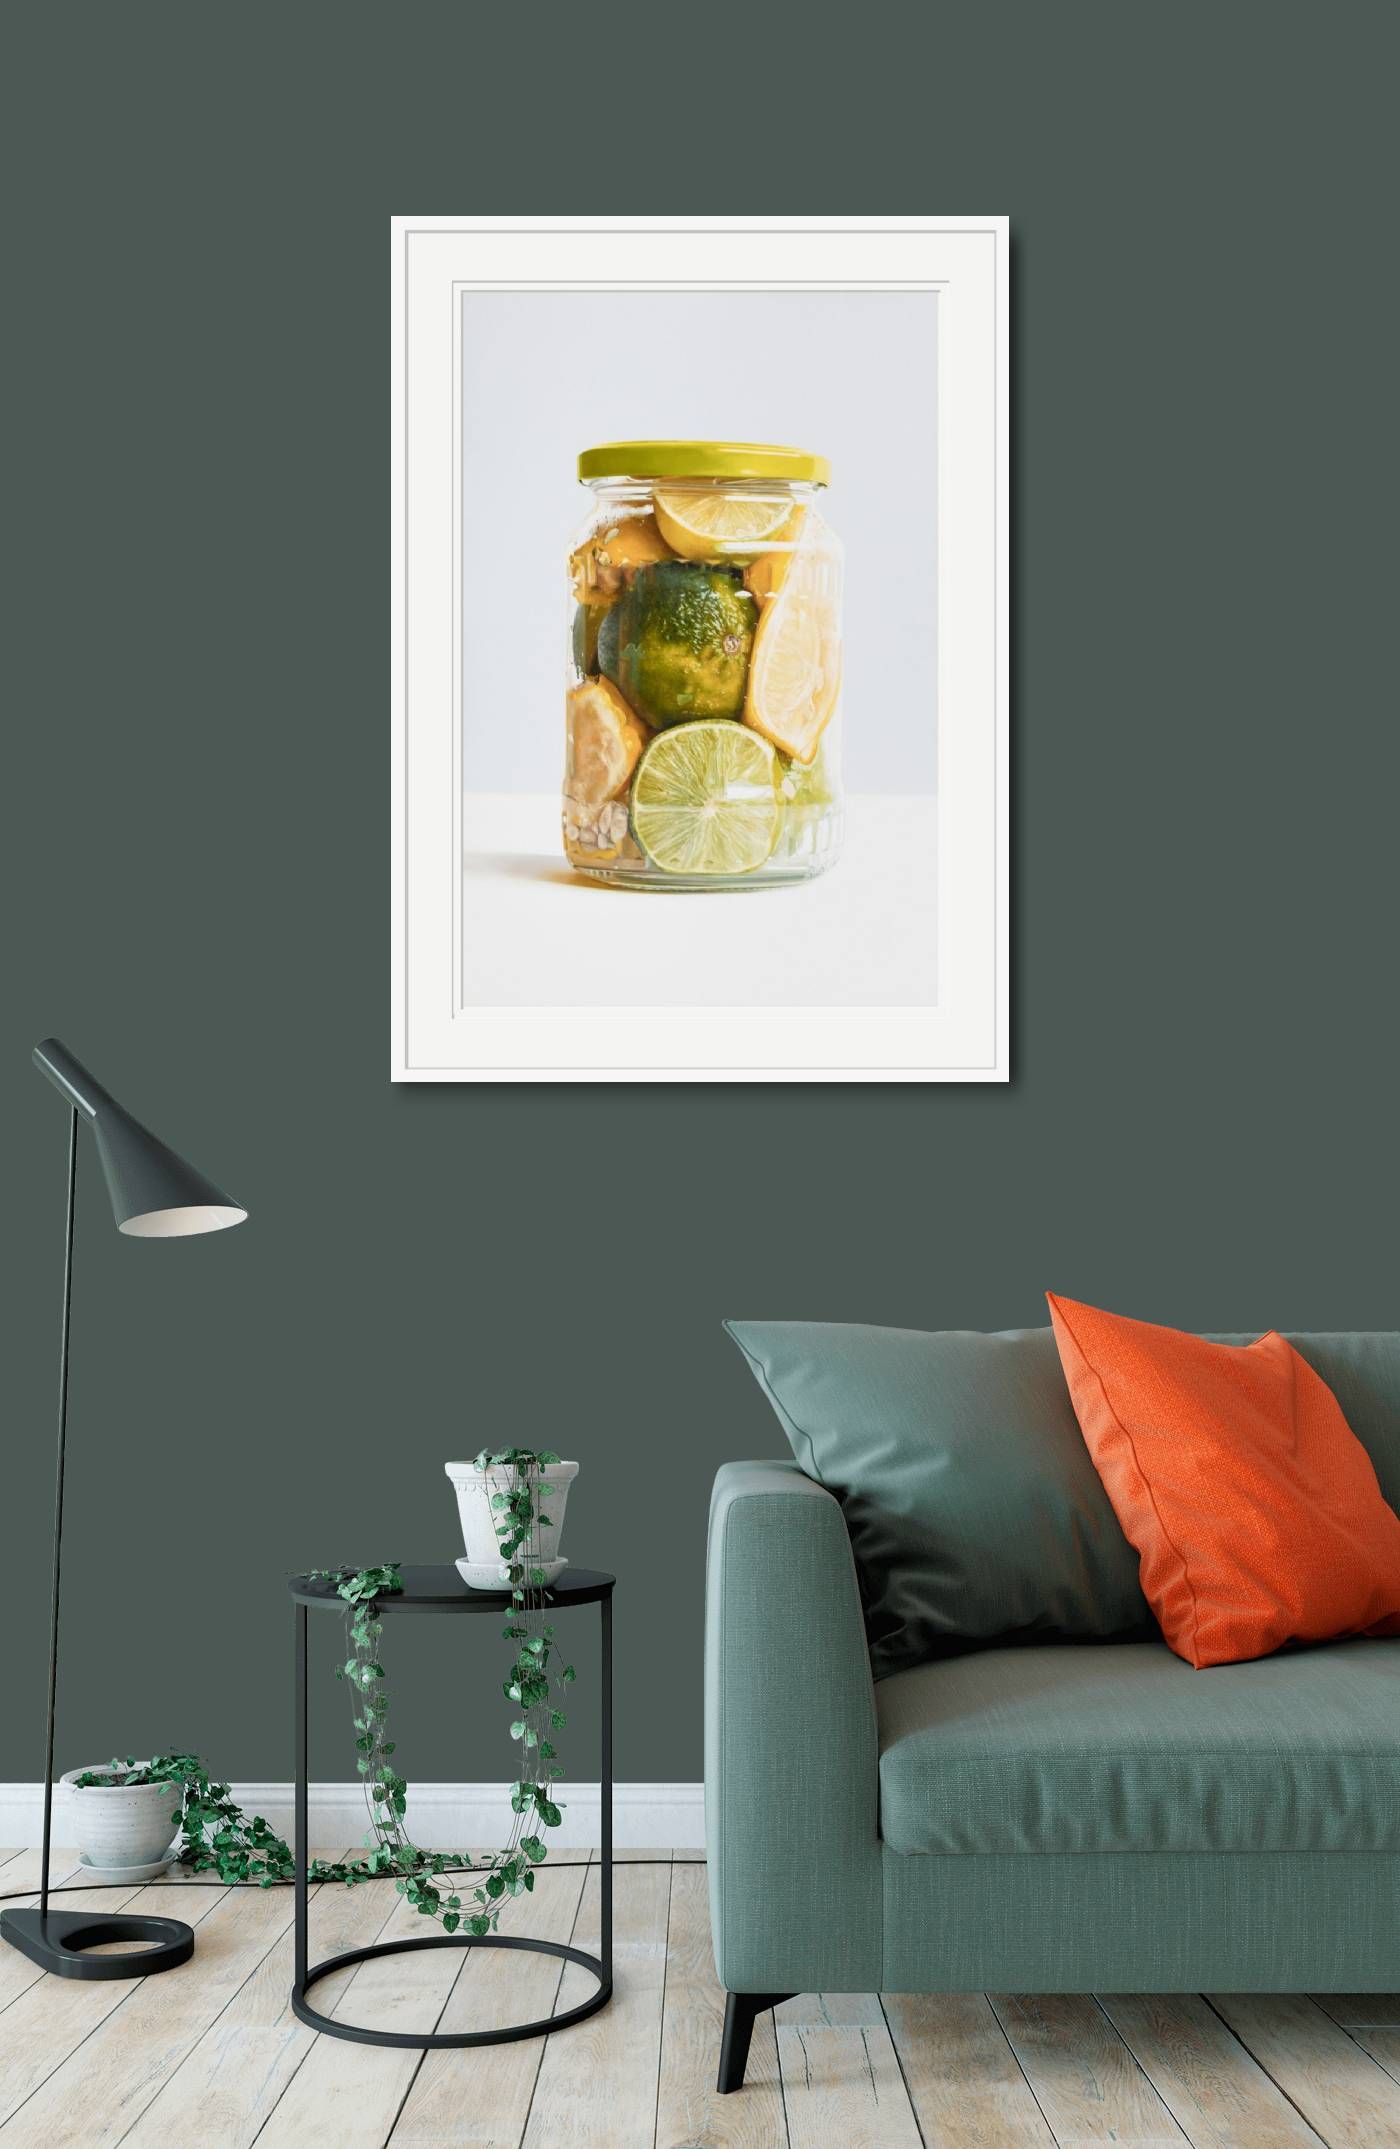 Small - Lemons and Limes in Jar by Stephen Johntson